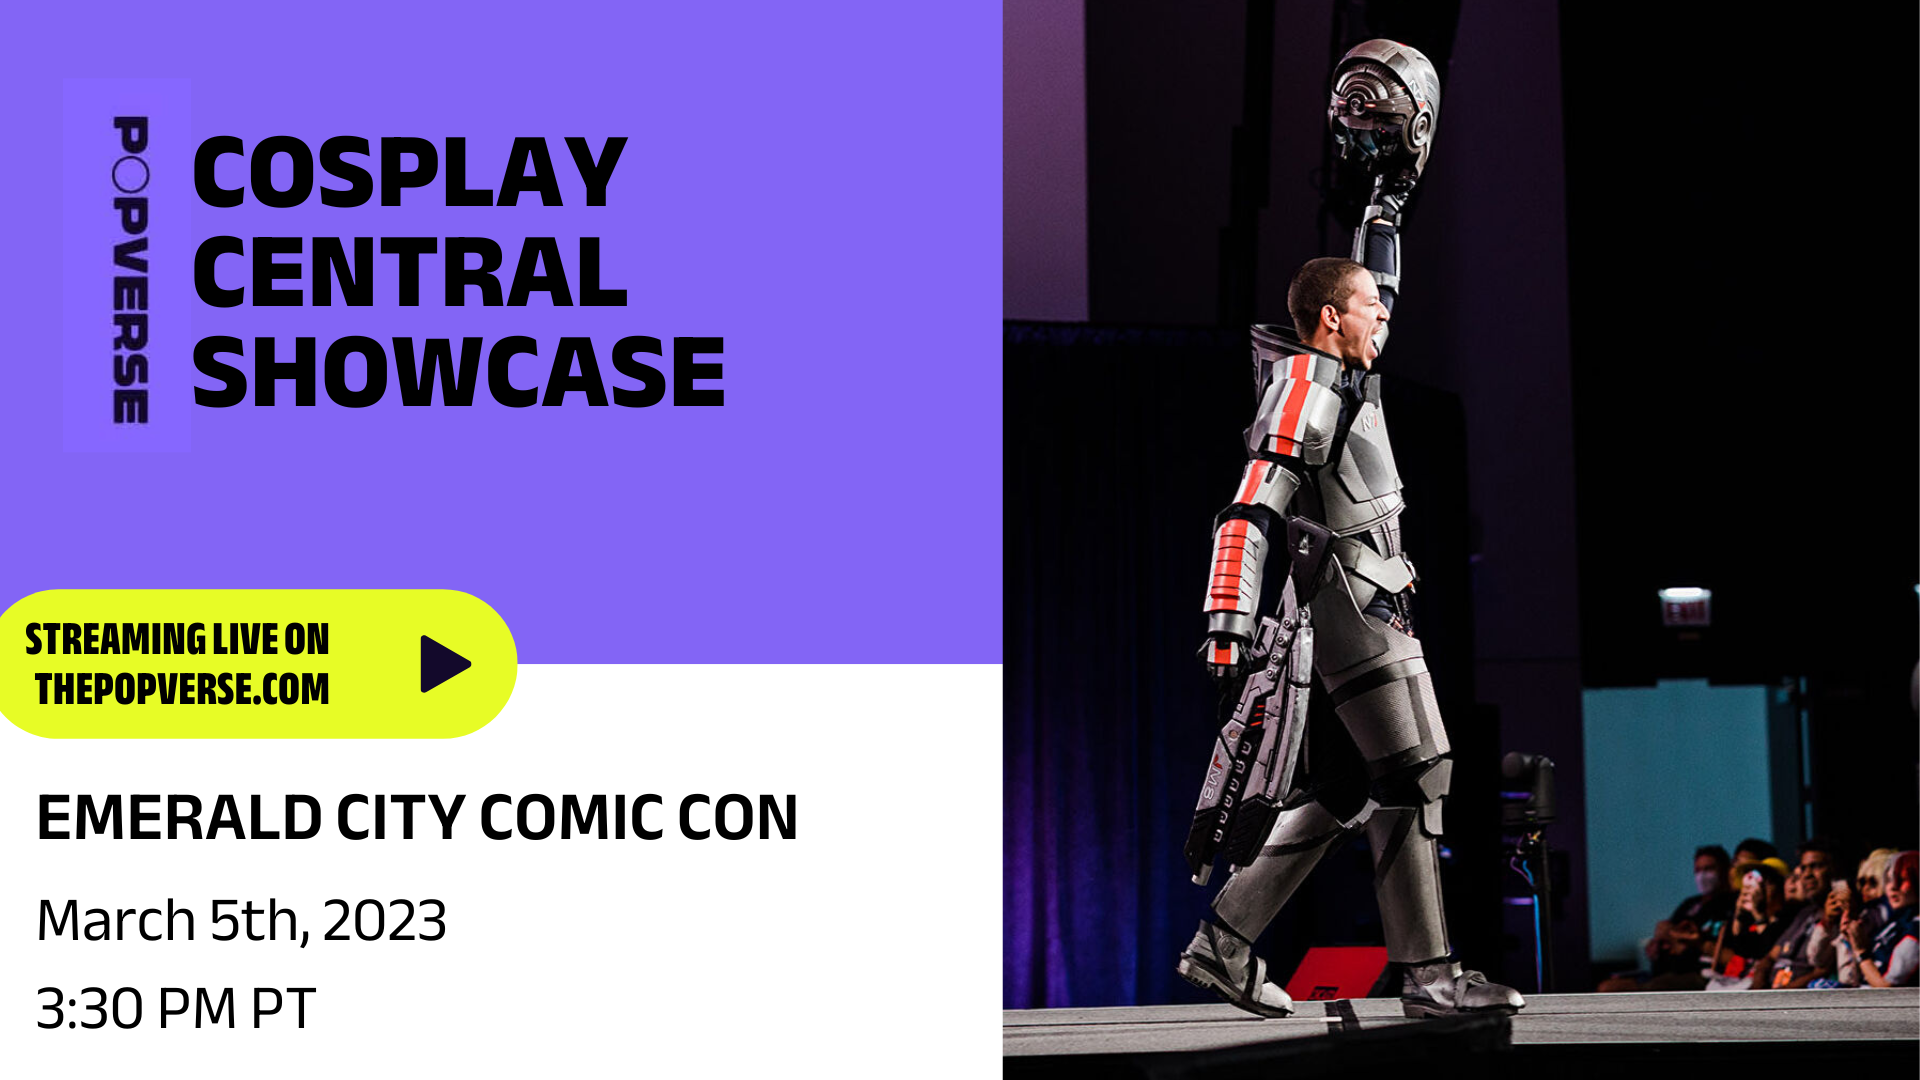 Image for Livestream the Cosplay Central Showcase panel from ECCC '23